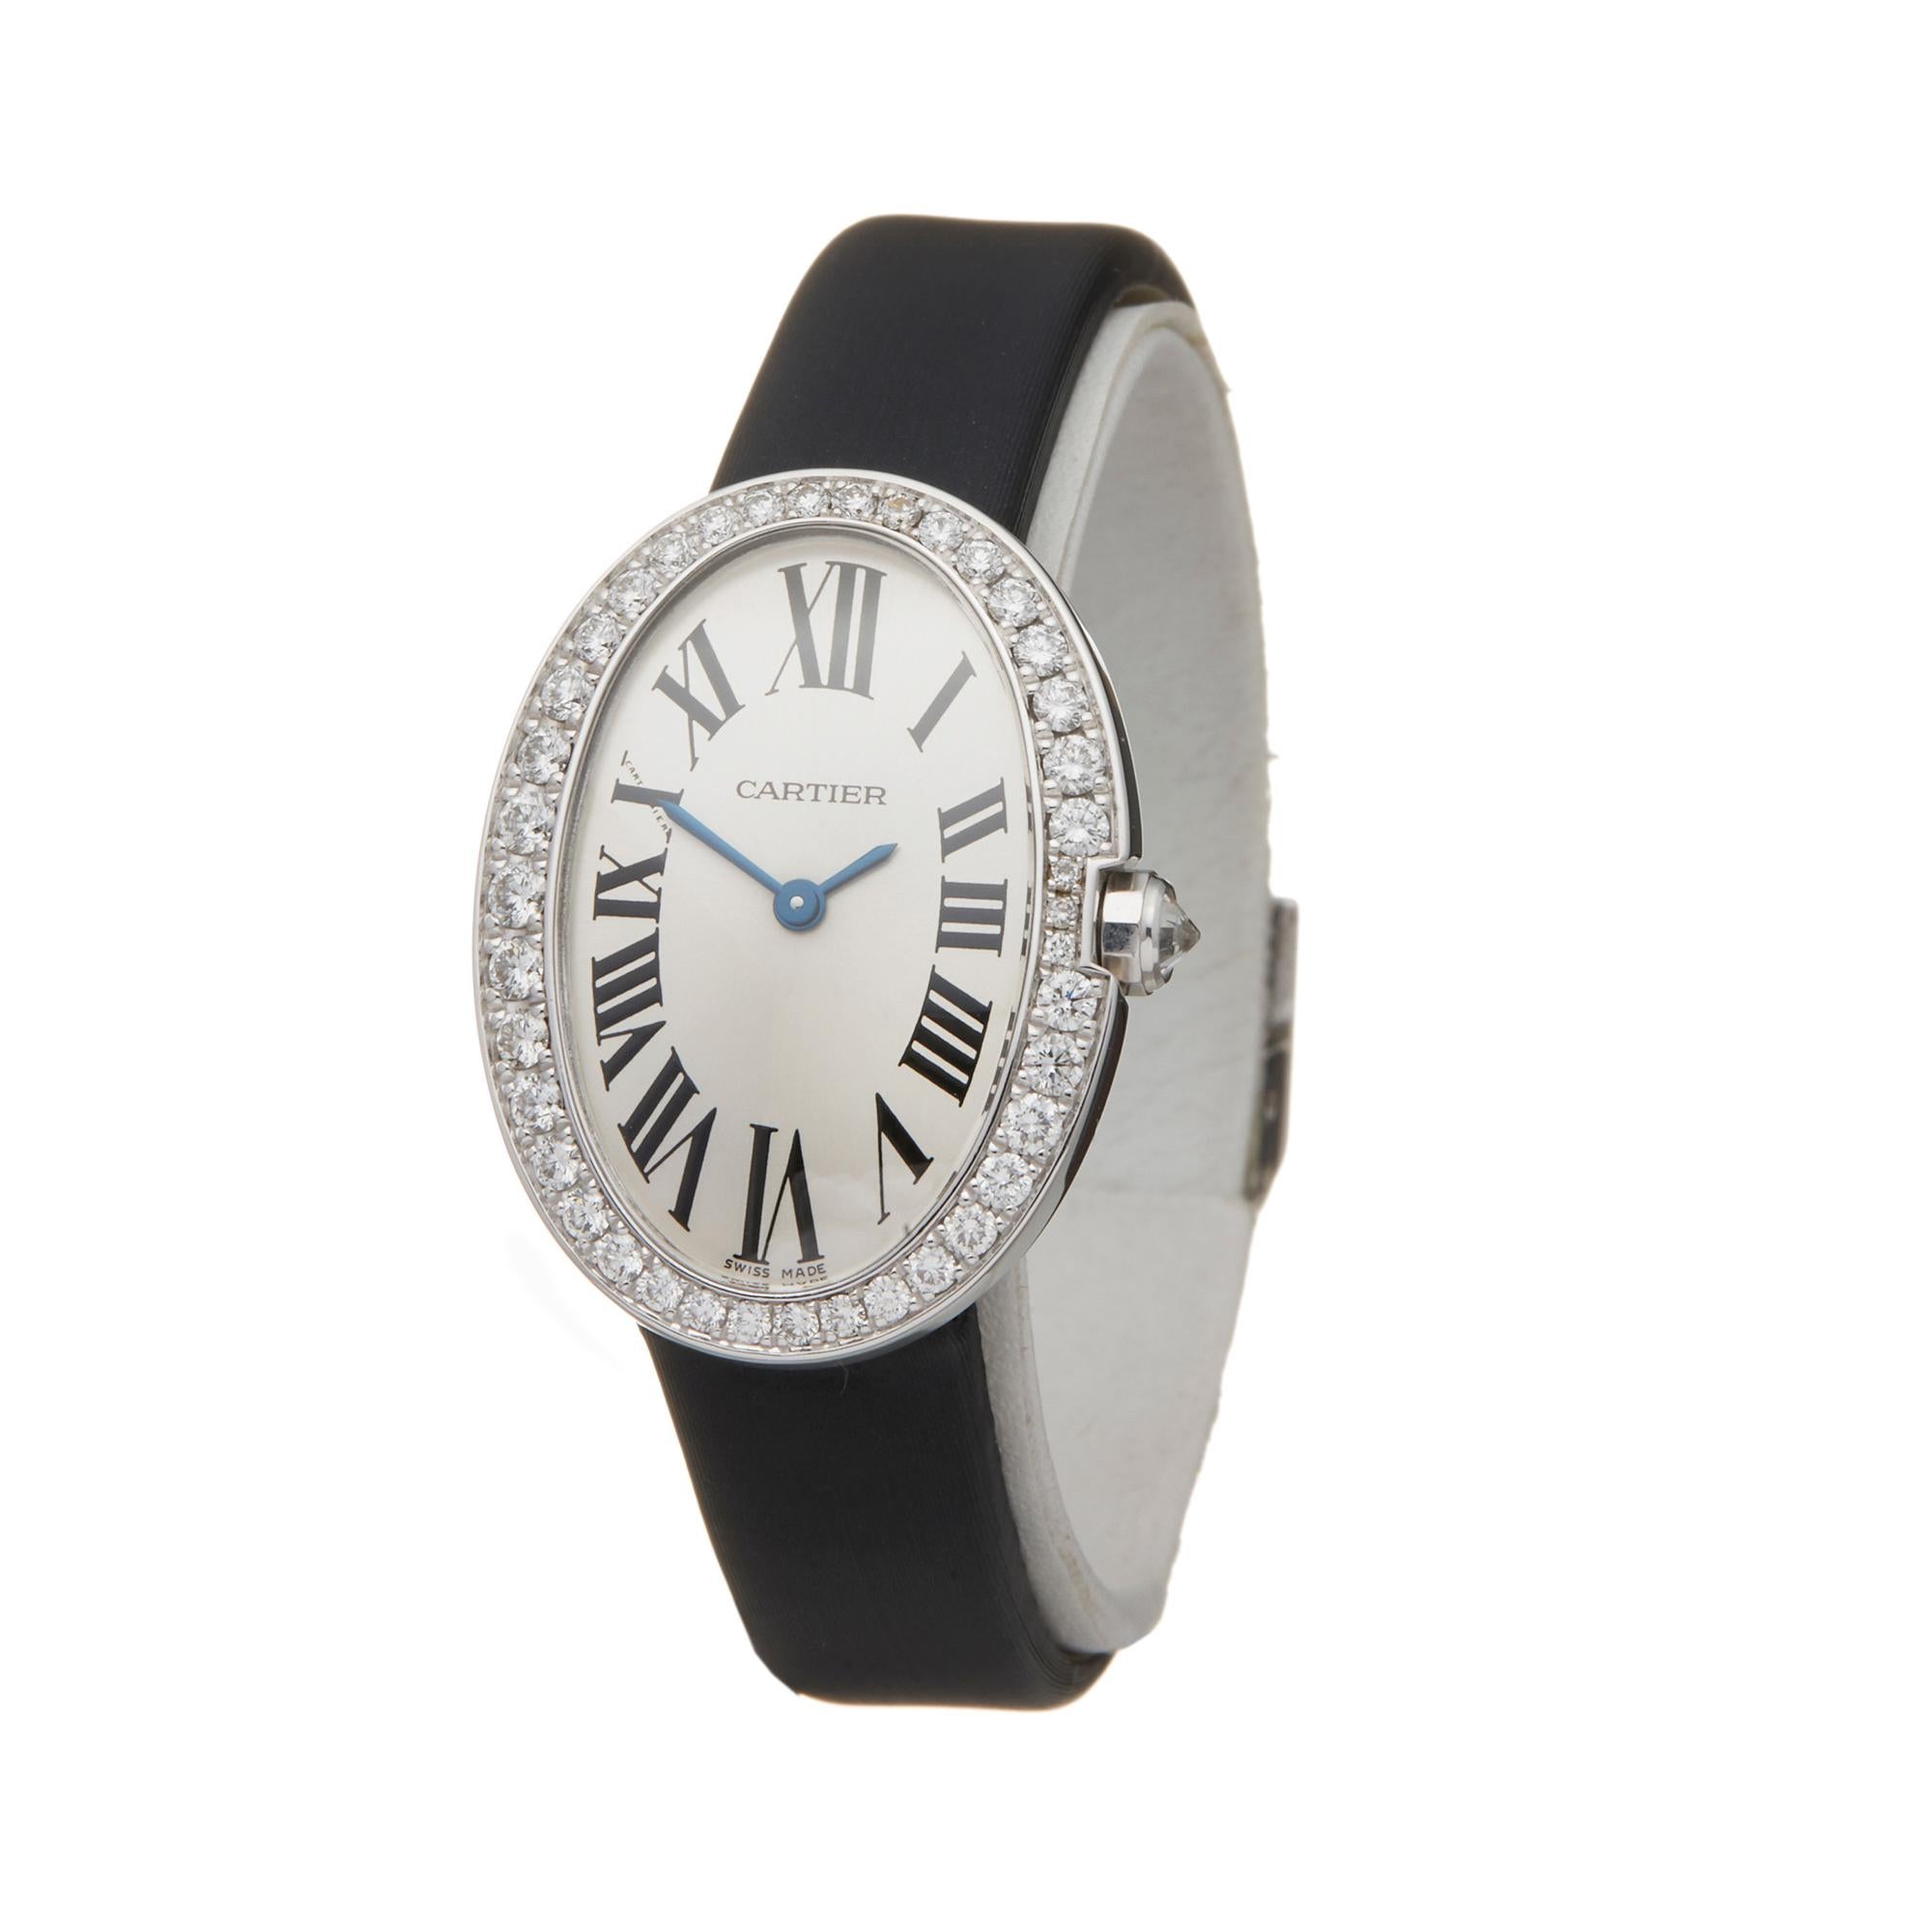 Reference: W6084
Manufacturer: Cartier
Model: Baignoire
Model Reference: 3065
Age: Circa 2010's
Gender: Women's
Box and Papres: Box, Authenticity Certificate, Service Pouch and Service Papers dated 8th April 2019
Dial: Silver Roman
Glass: Sapphire